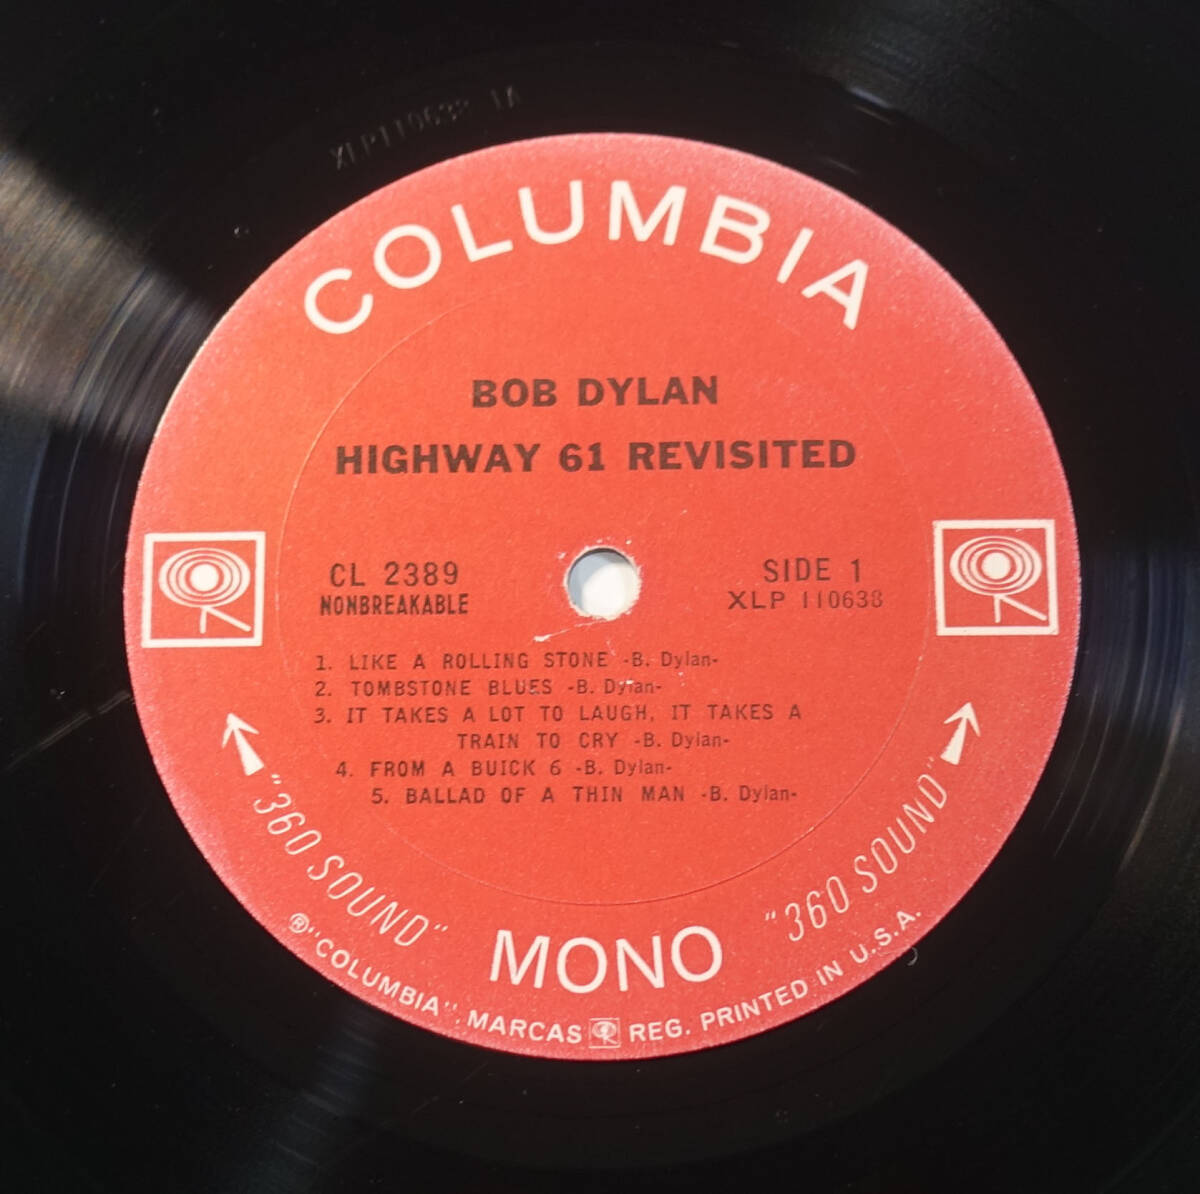 US Columbia MONO CL 2389 最初回 Highway 61 Revisited / Bob Dylan MAT: 1A/1A の画像3